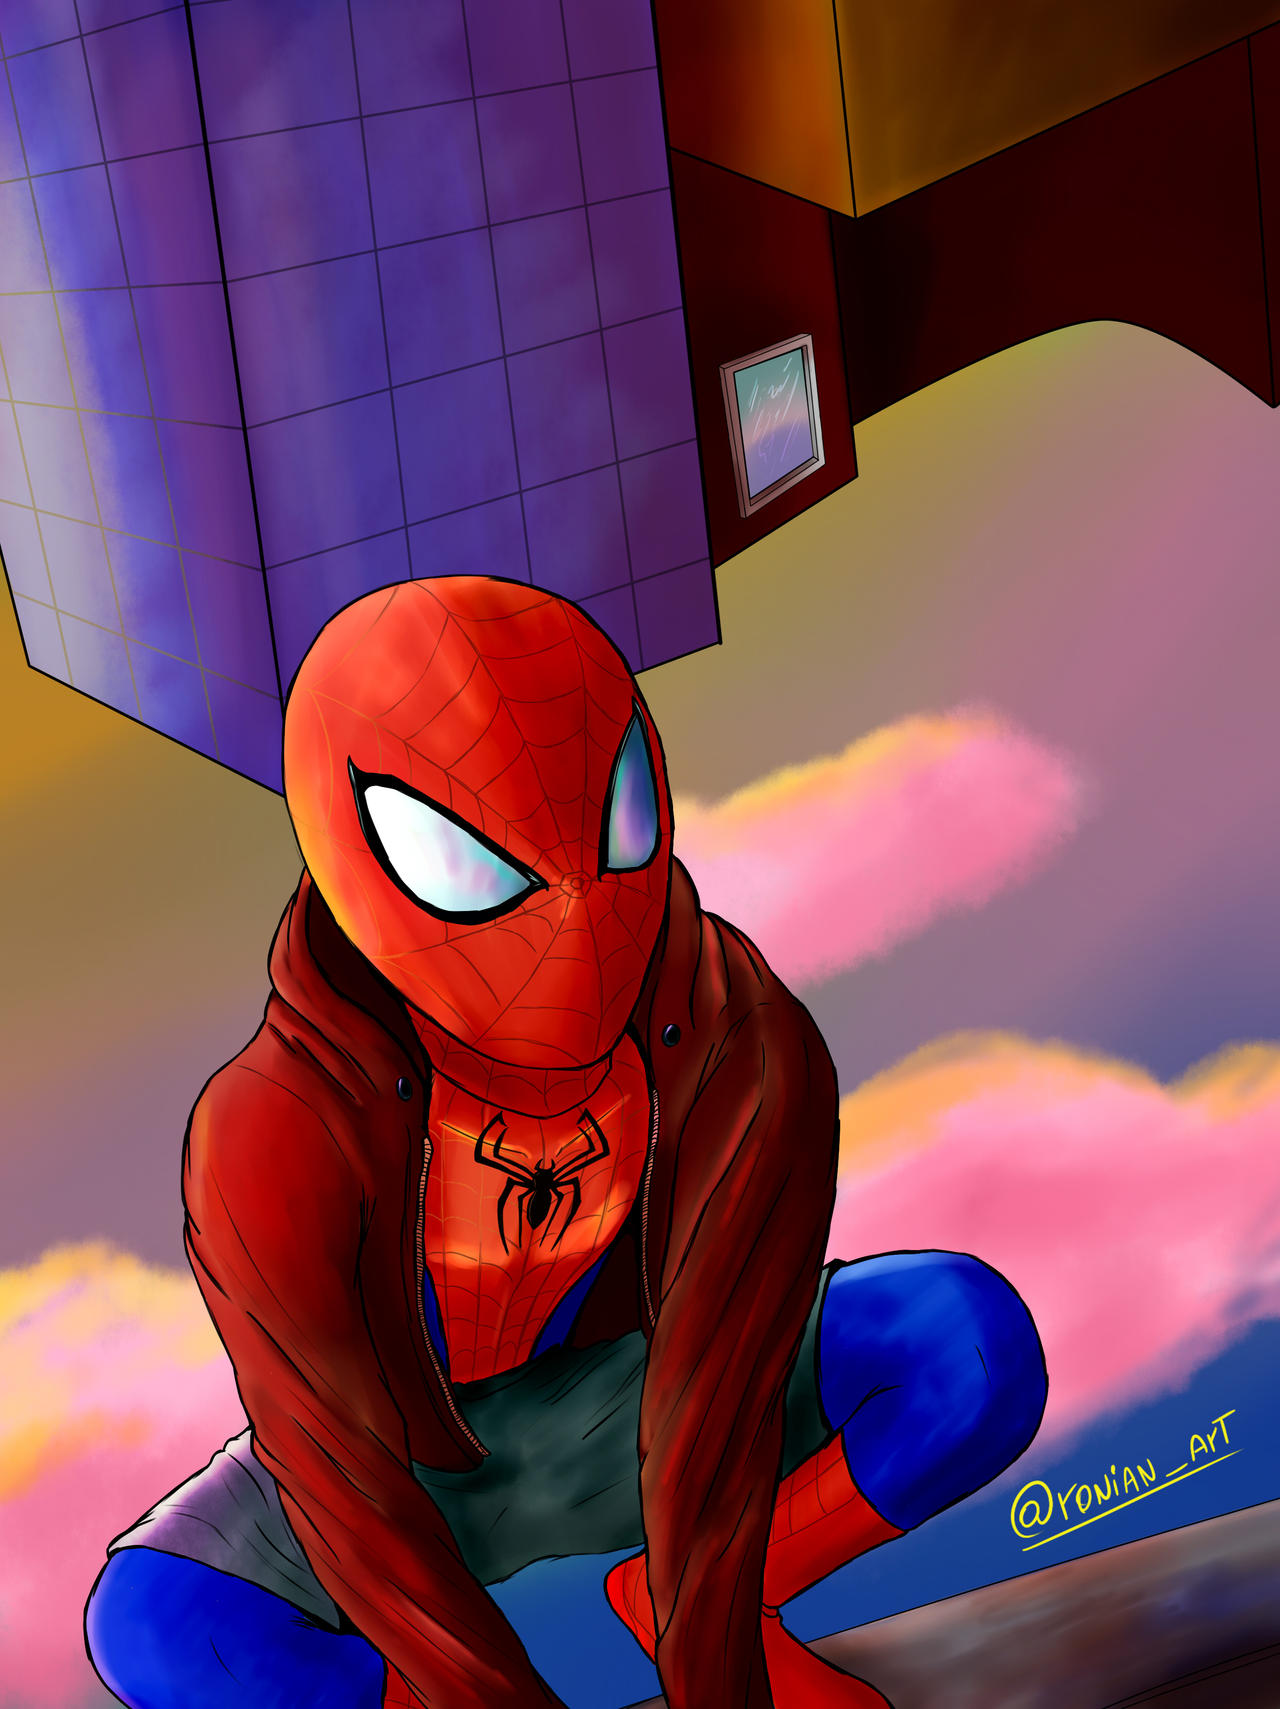 Spiderman by ronian14 on DeviantArt